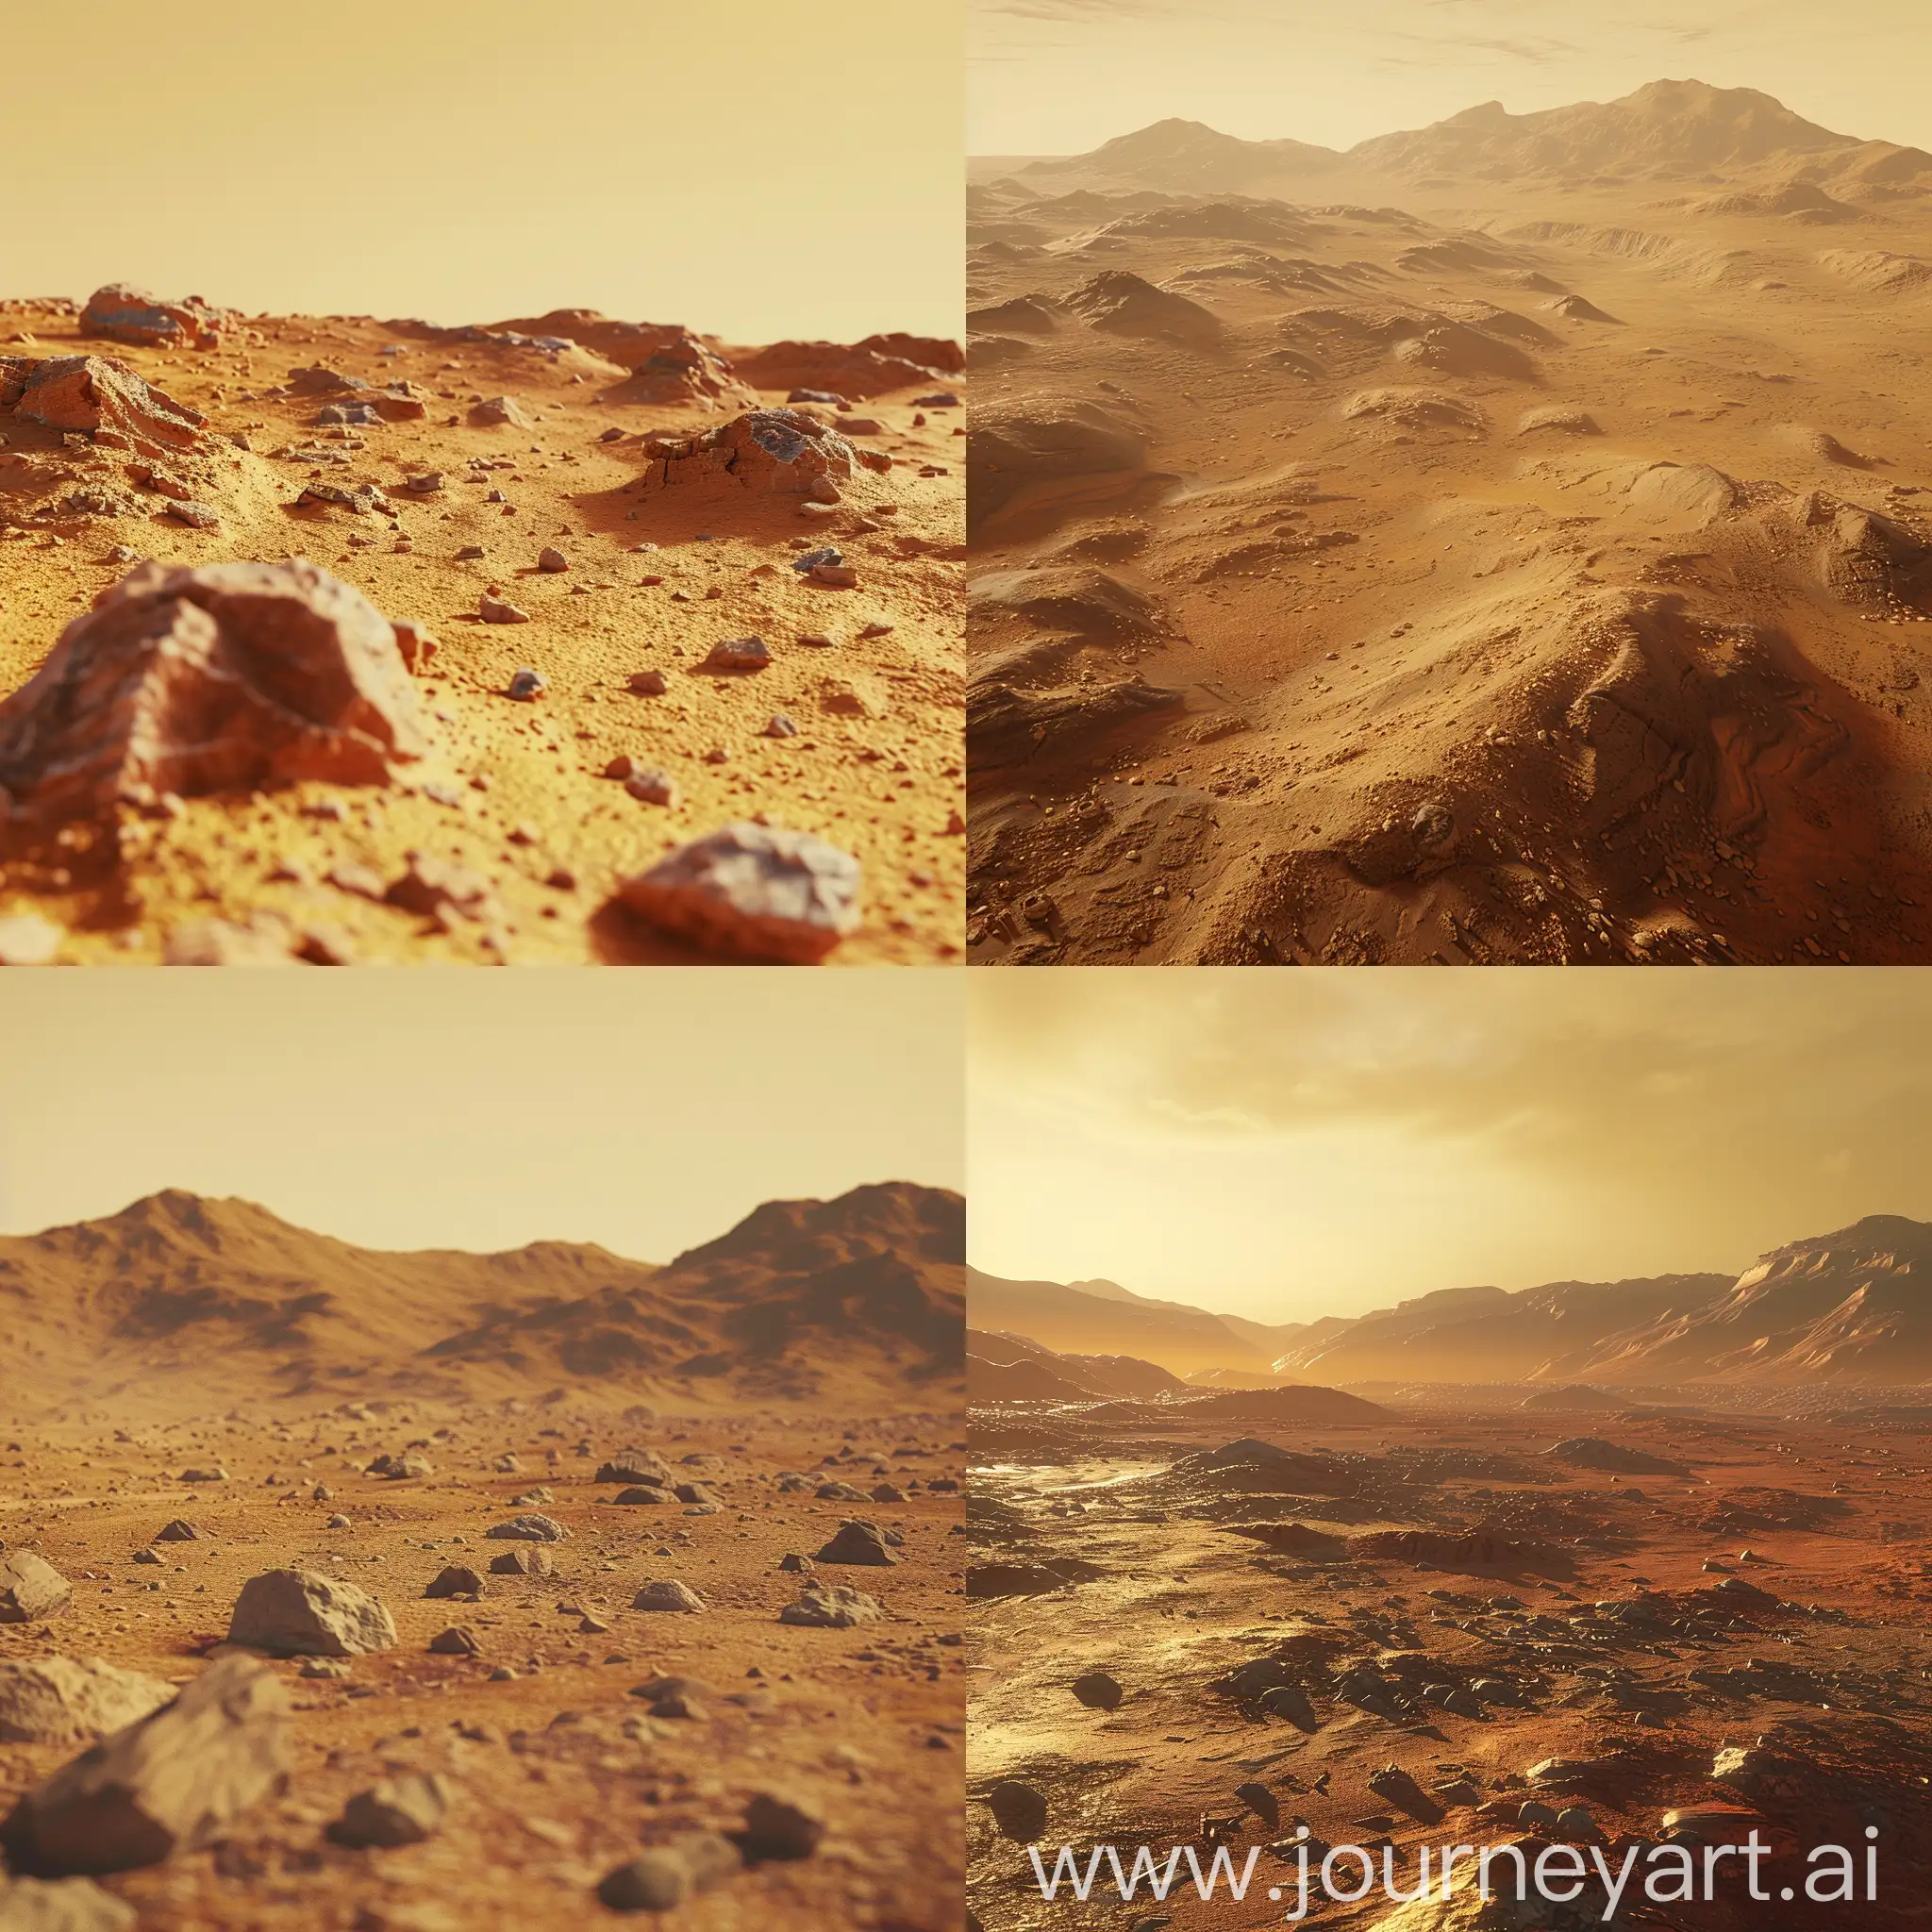 Photorealistic. 4K. First-person view. The sky is yellow-brown. The surface has a reddish-red color and is covered with small stones and sands of a reddish hue. The surface also has relief in the form of low valleys, mountains, and canyons.